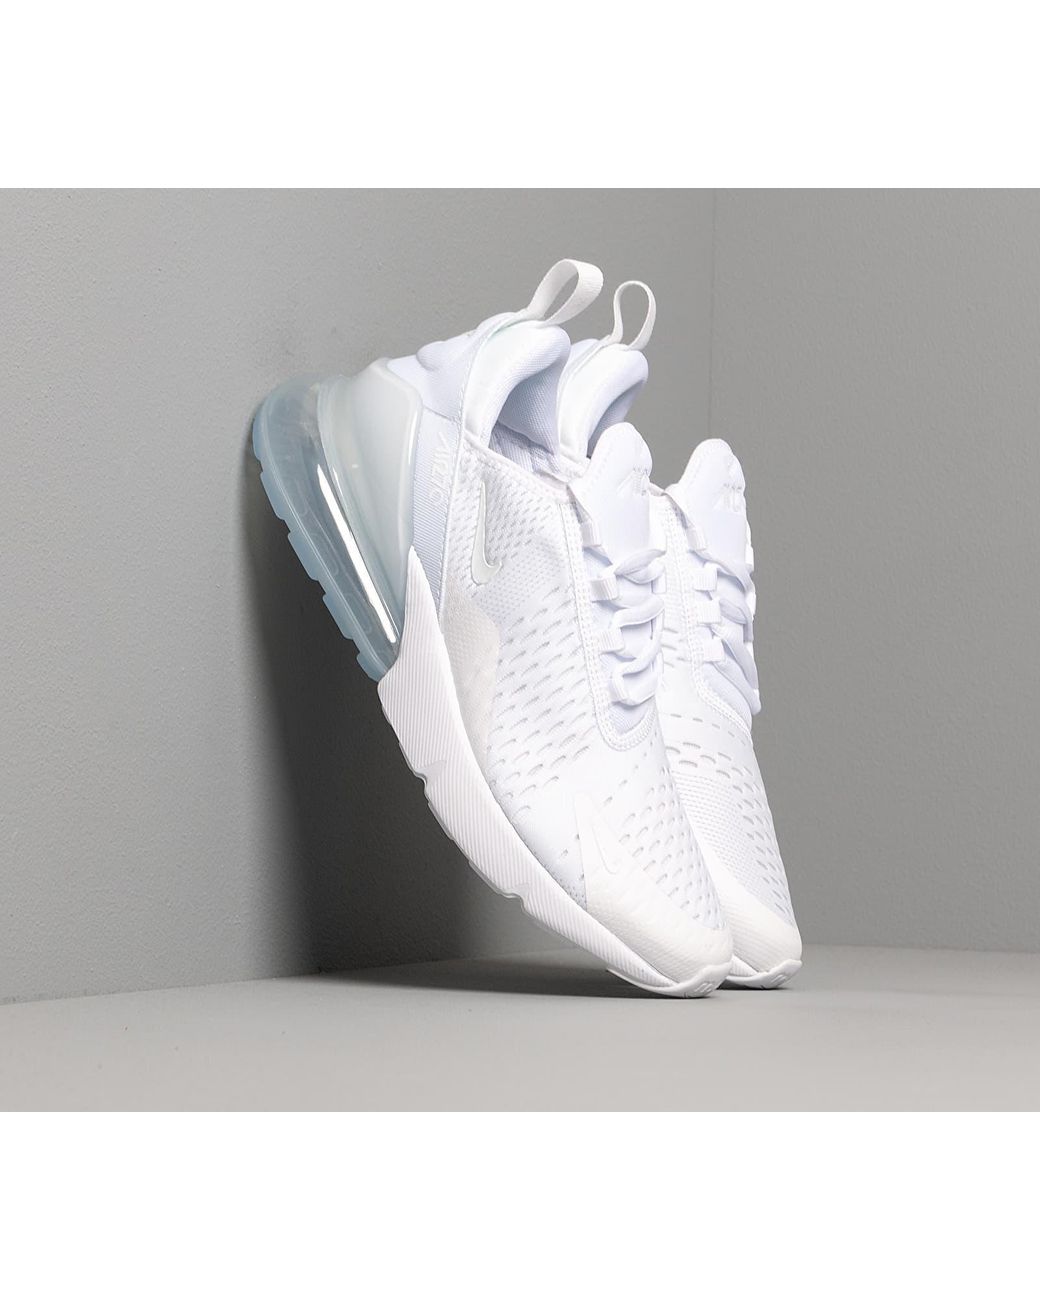 white and silver nike air max 270